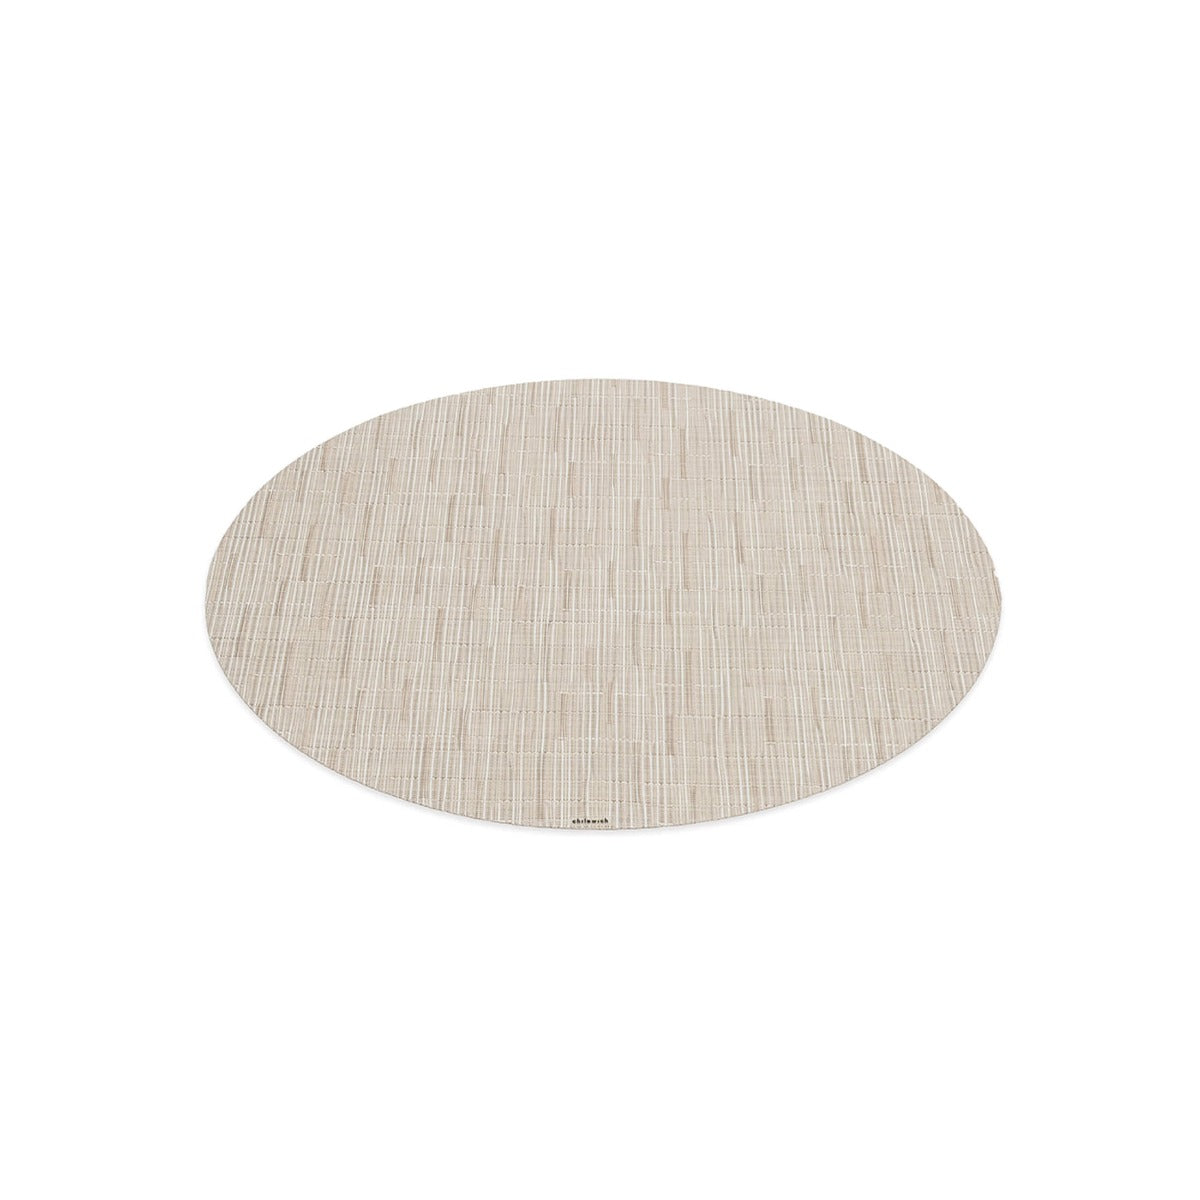 Chino Bamboo Oval Placemat